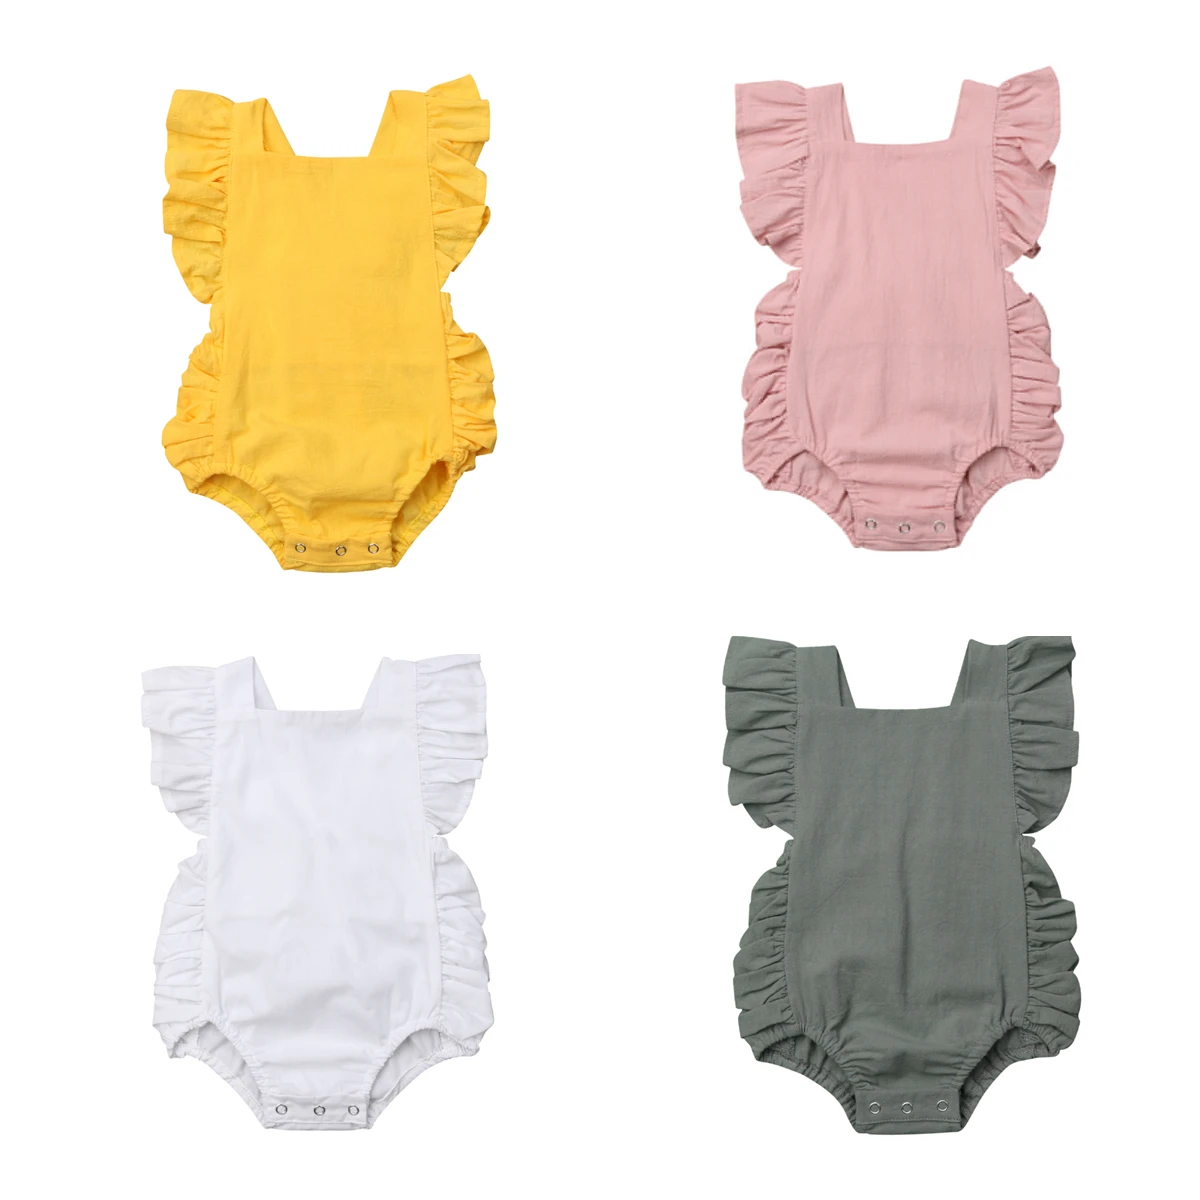 customised baby bodysuits Newborn Baby Girl Ruffled Solid Color Sleeveless Backless Romper Jumpsuit Outfit Sunsuit Baby Summer Clothing 0-24M bulk baby bodysuits	